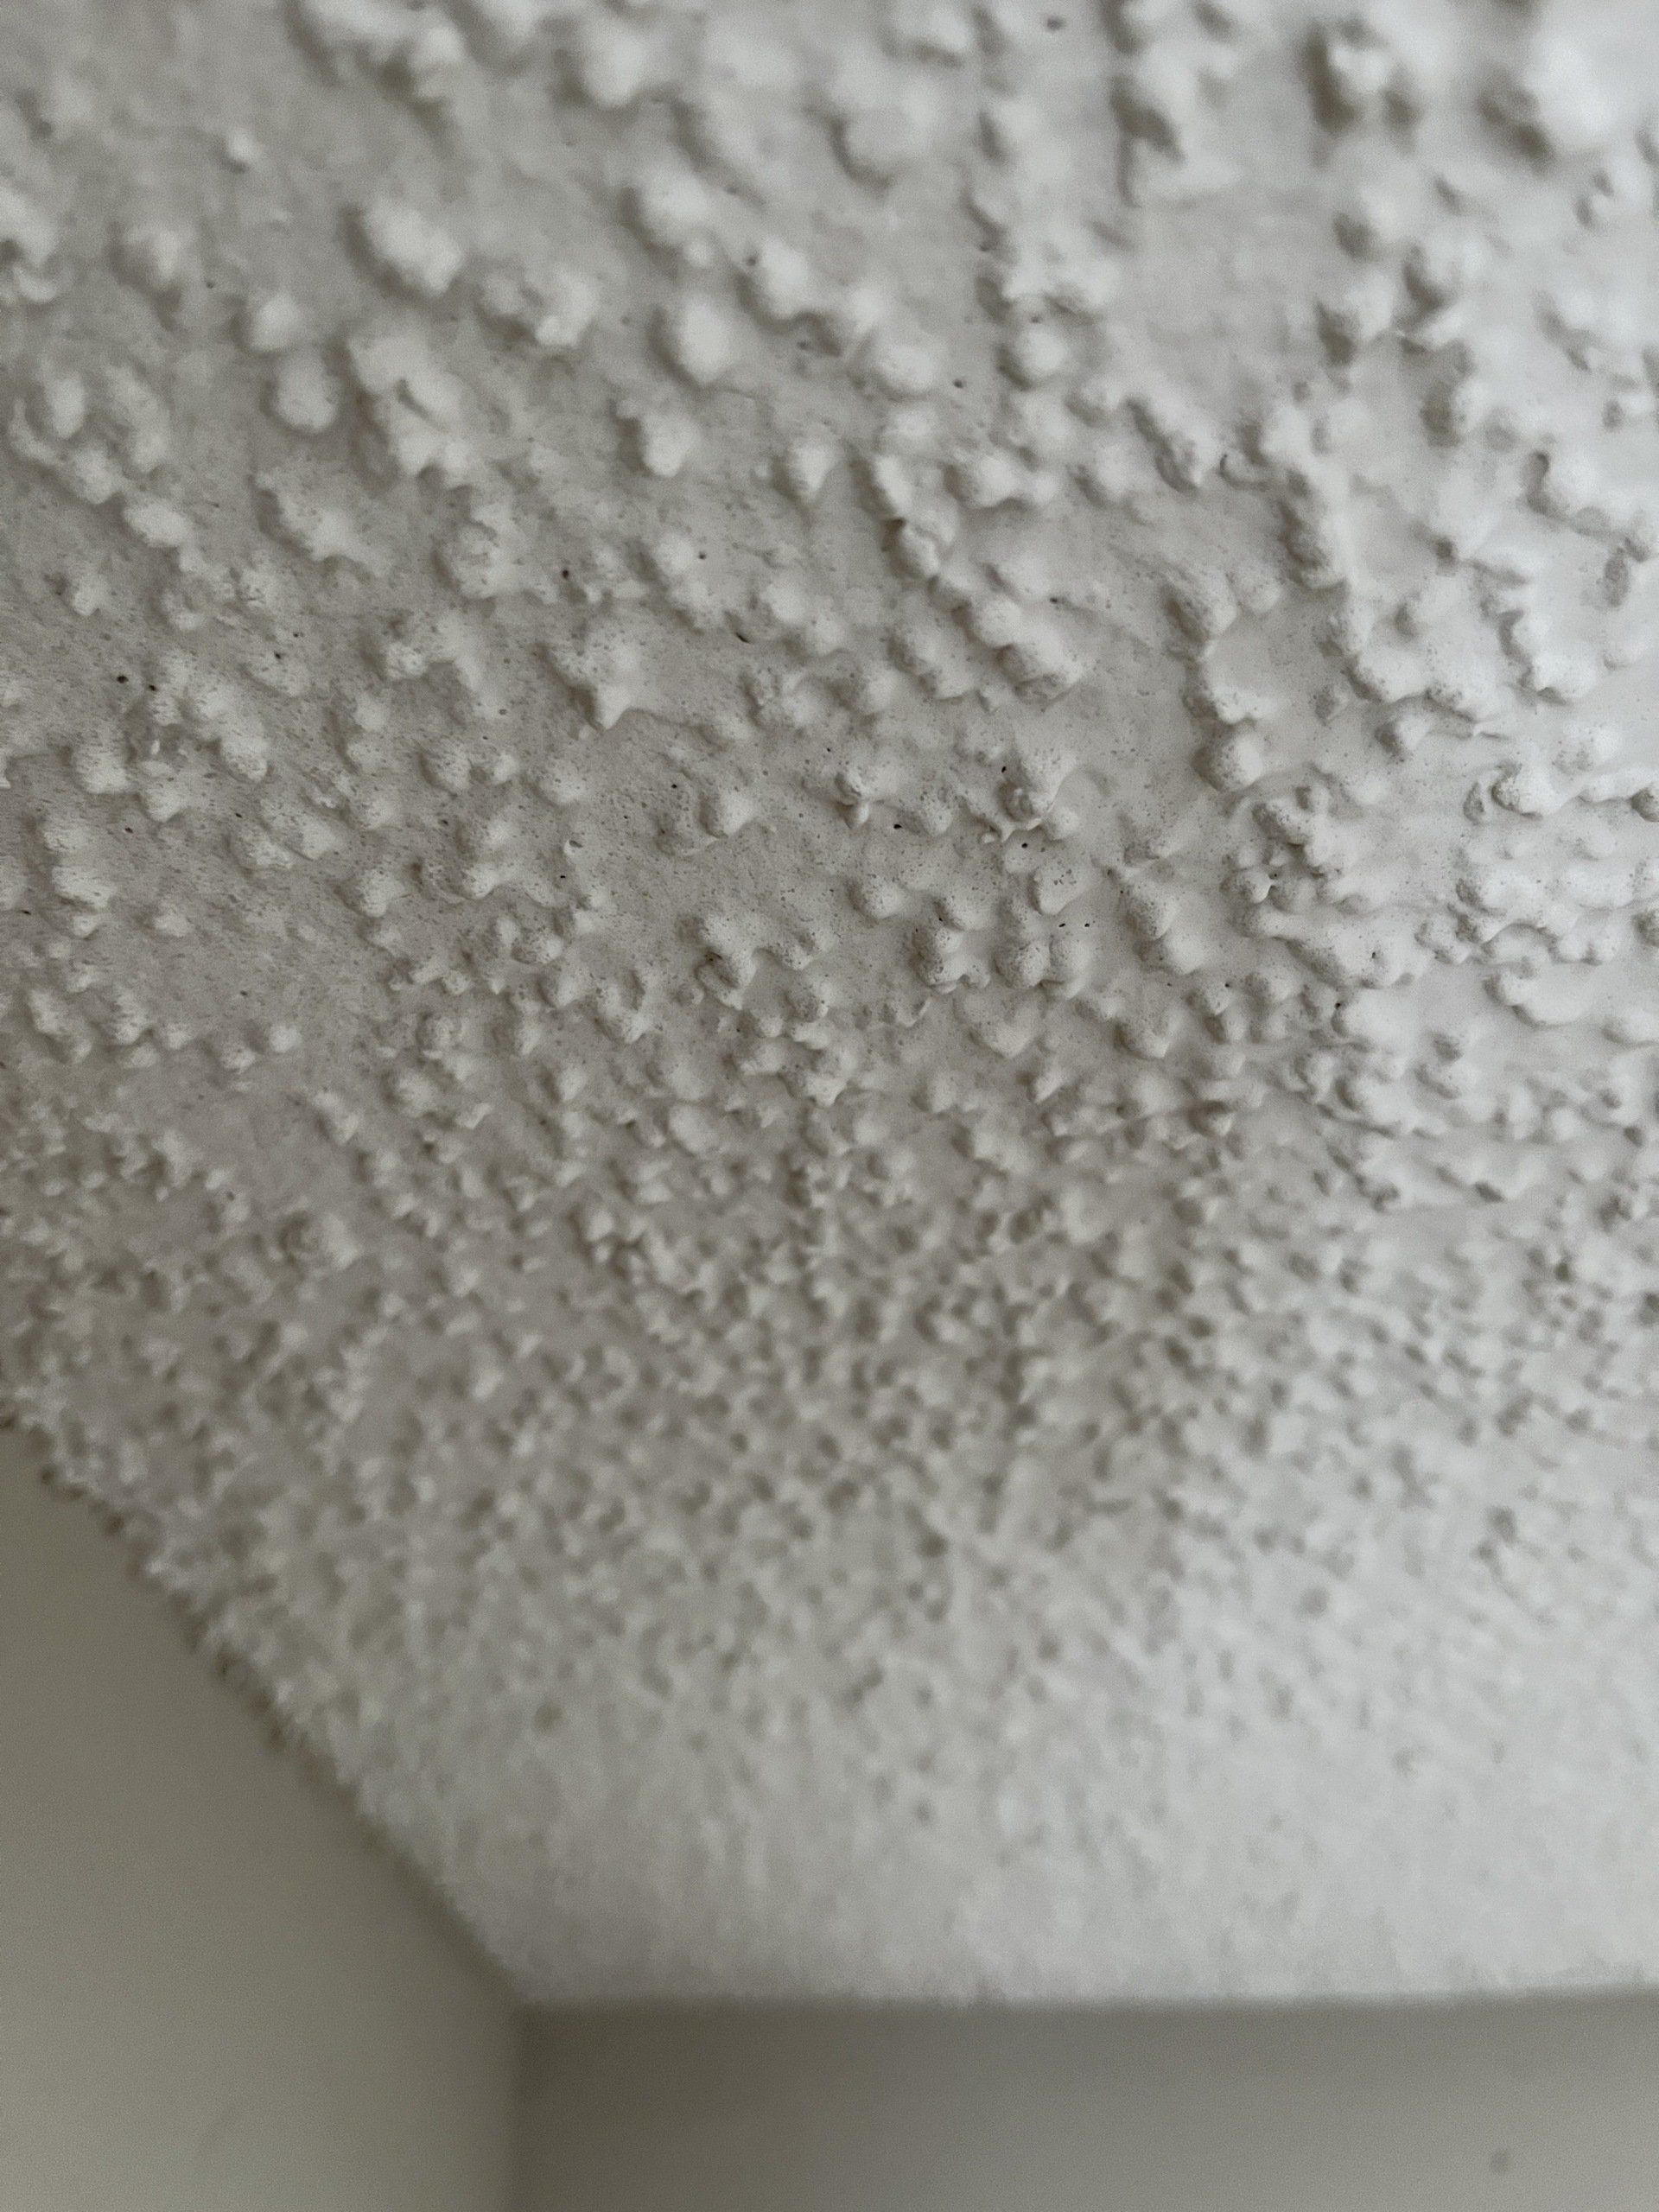 extreme close up of popcorn texture on ceiling in older apartment